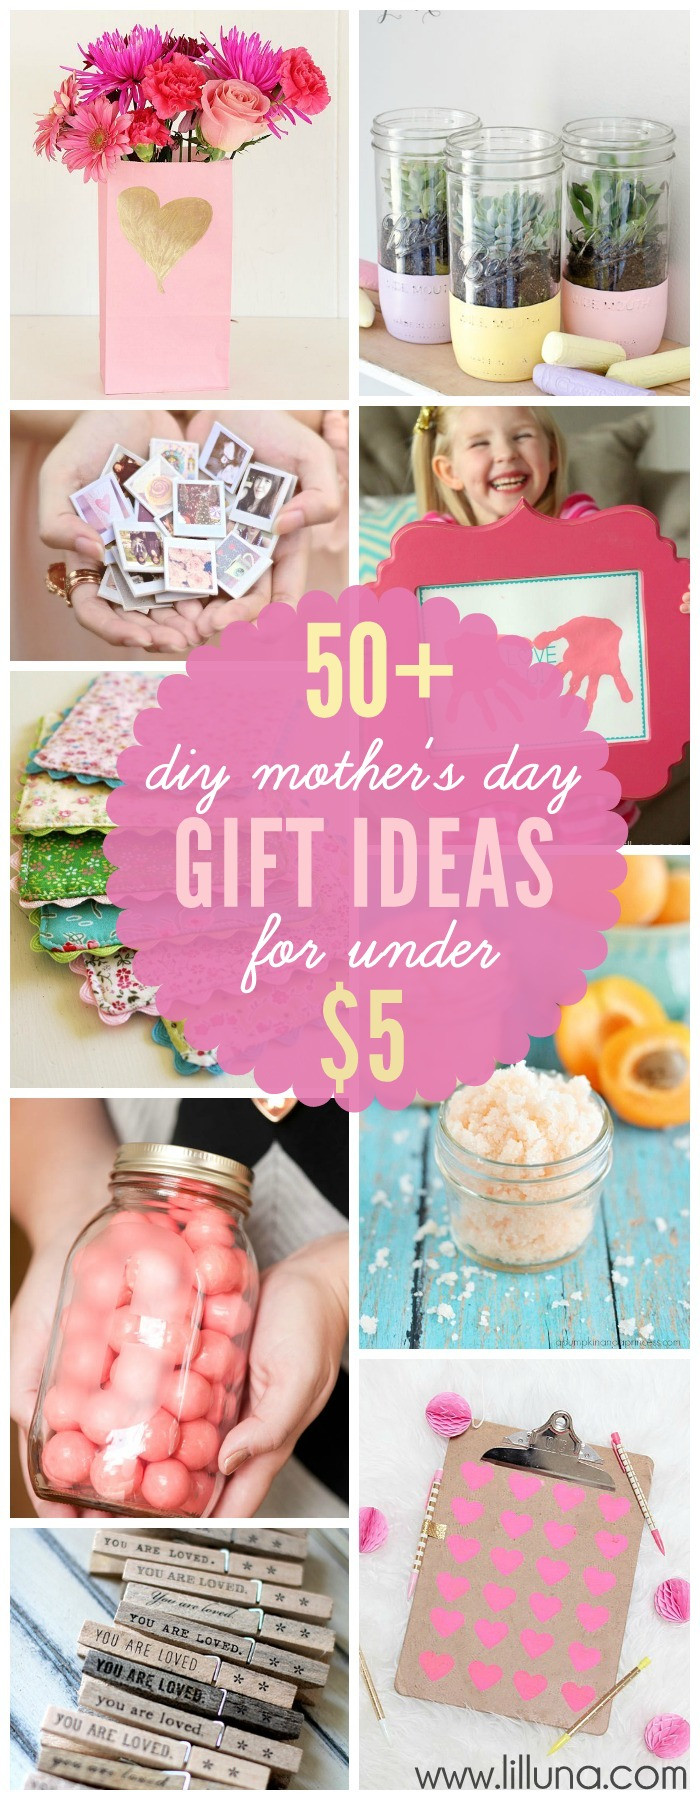 Mothers Da Gift Ideas
 Mother s Day Gift Ideas